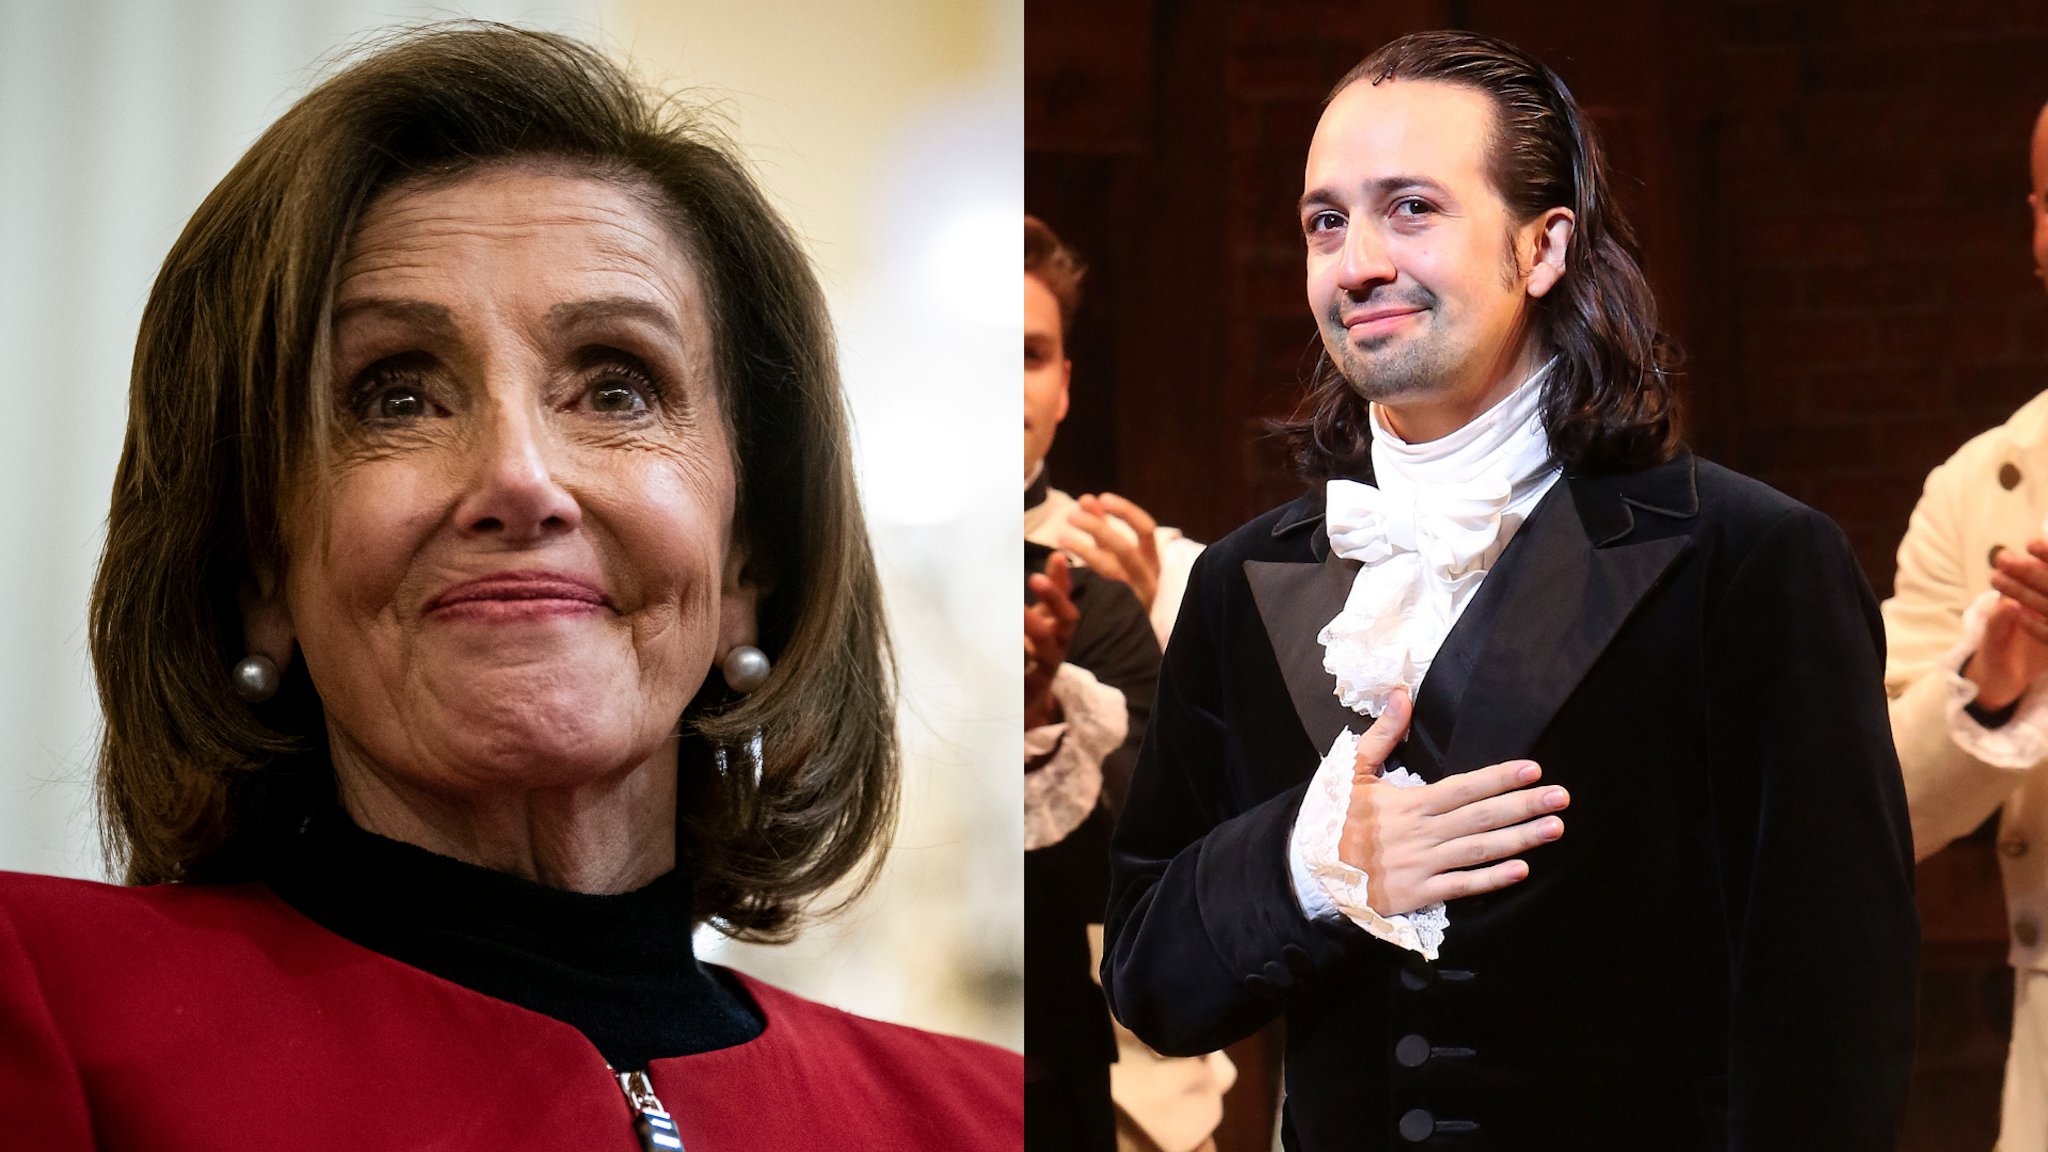 House Speaker Nancy Pelosi (D-CA) listens to a video of the cast of the musical "Hamilton" during a discussion with historians Doris Kearns Goodwin and Jon Meacham about the 2021 attack on the U.S. Capitol on January 6, 2022 in Washington, DC. Lin-Manuel Miranda performs his final